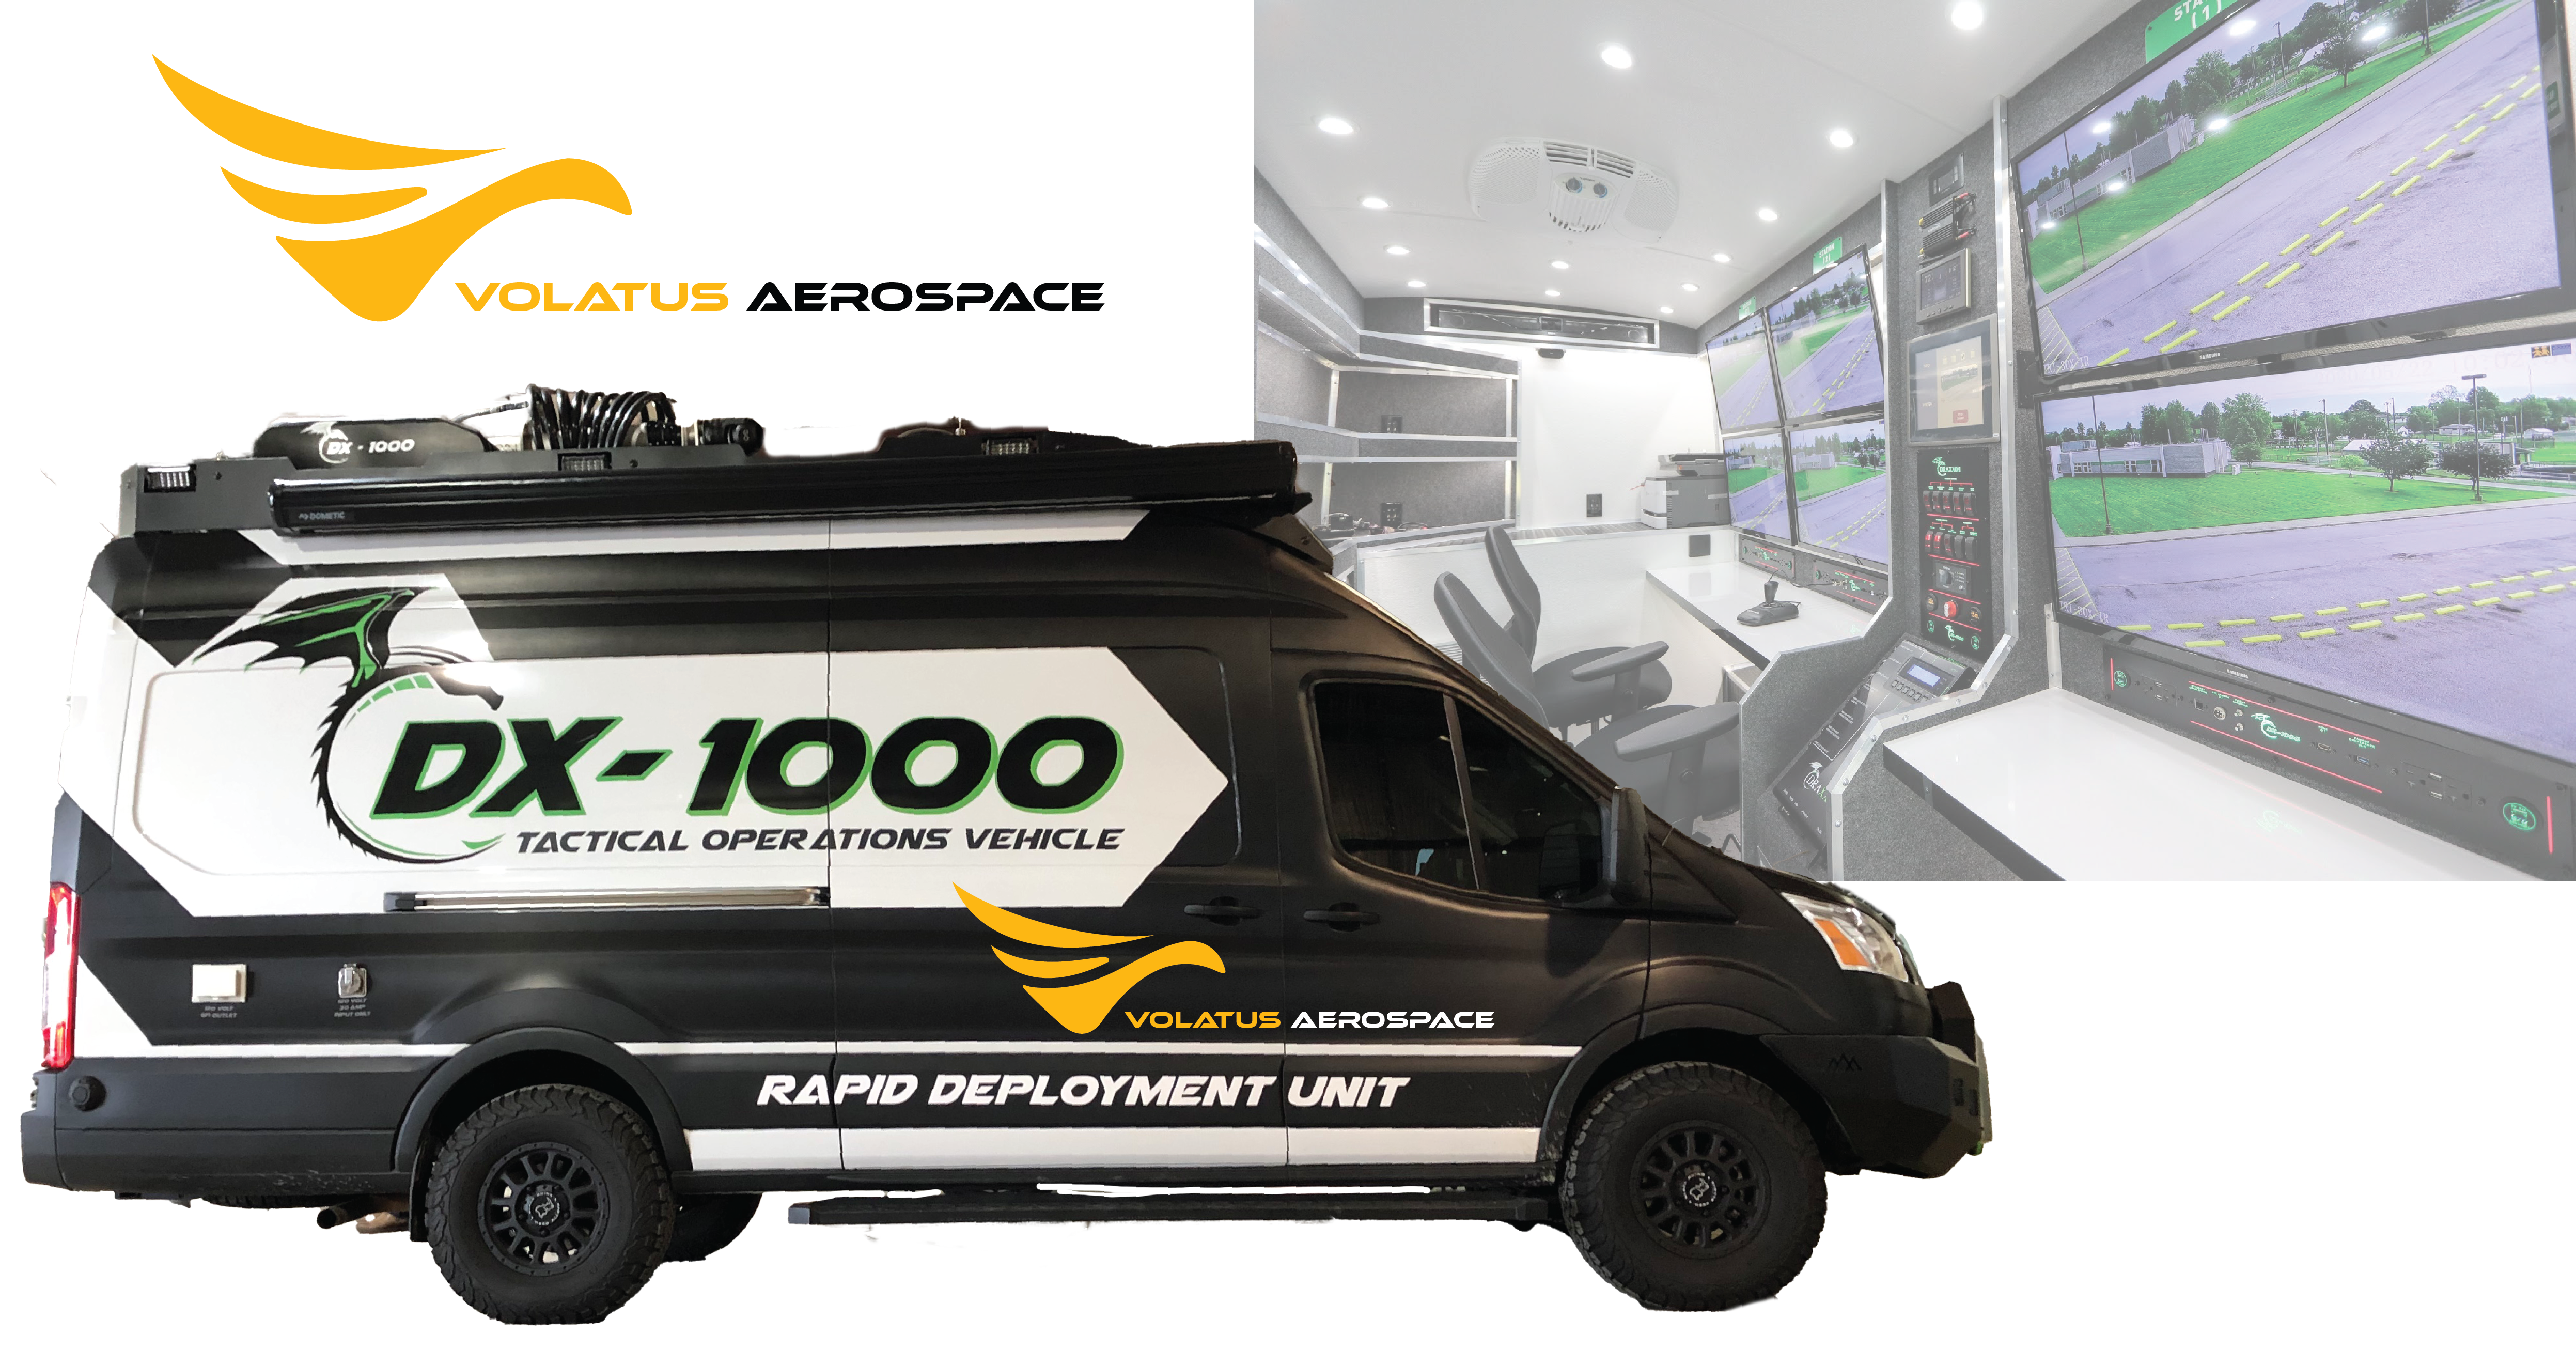 Volatus Aerospace accelerates its Public Safety Initiative with the addition of advanced UAV Mobile Command Units